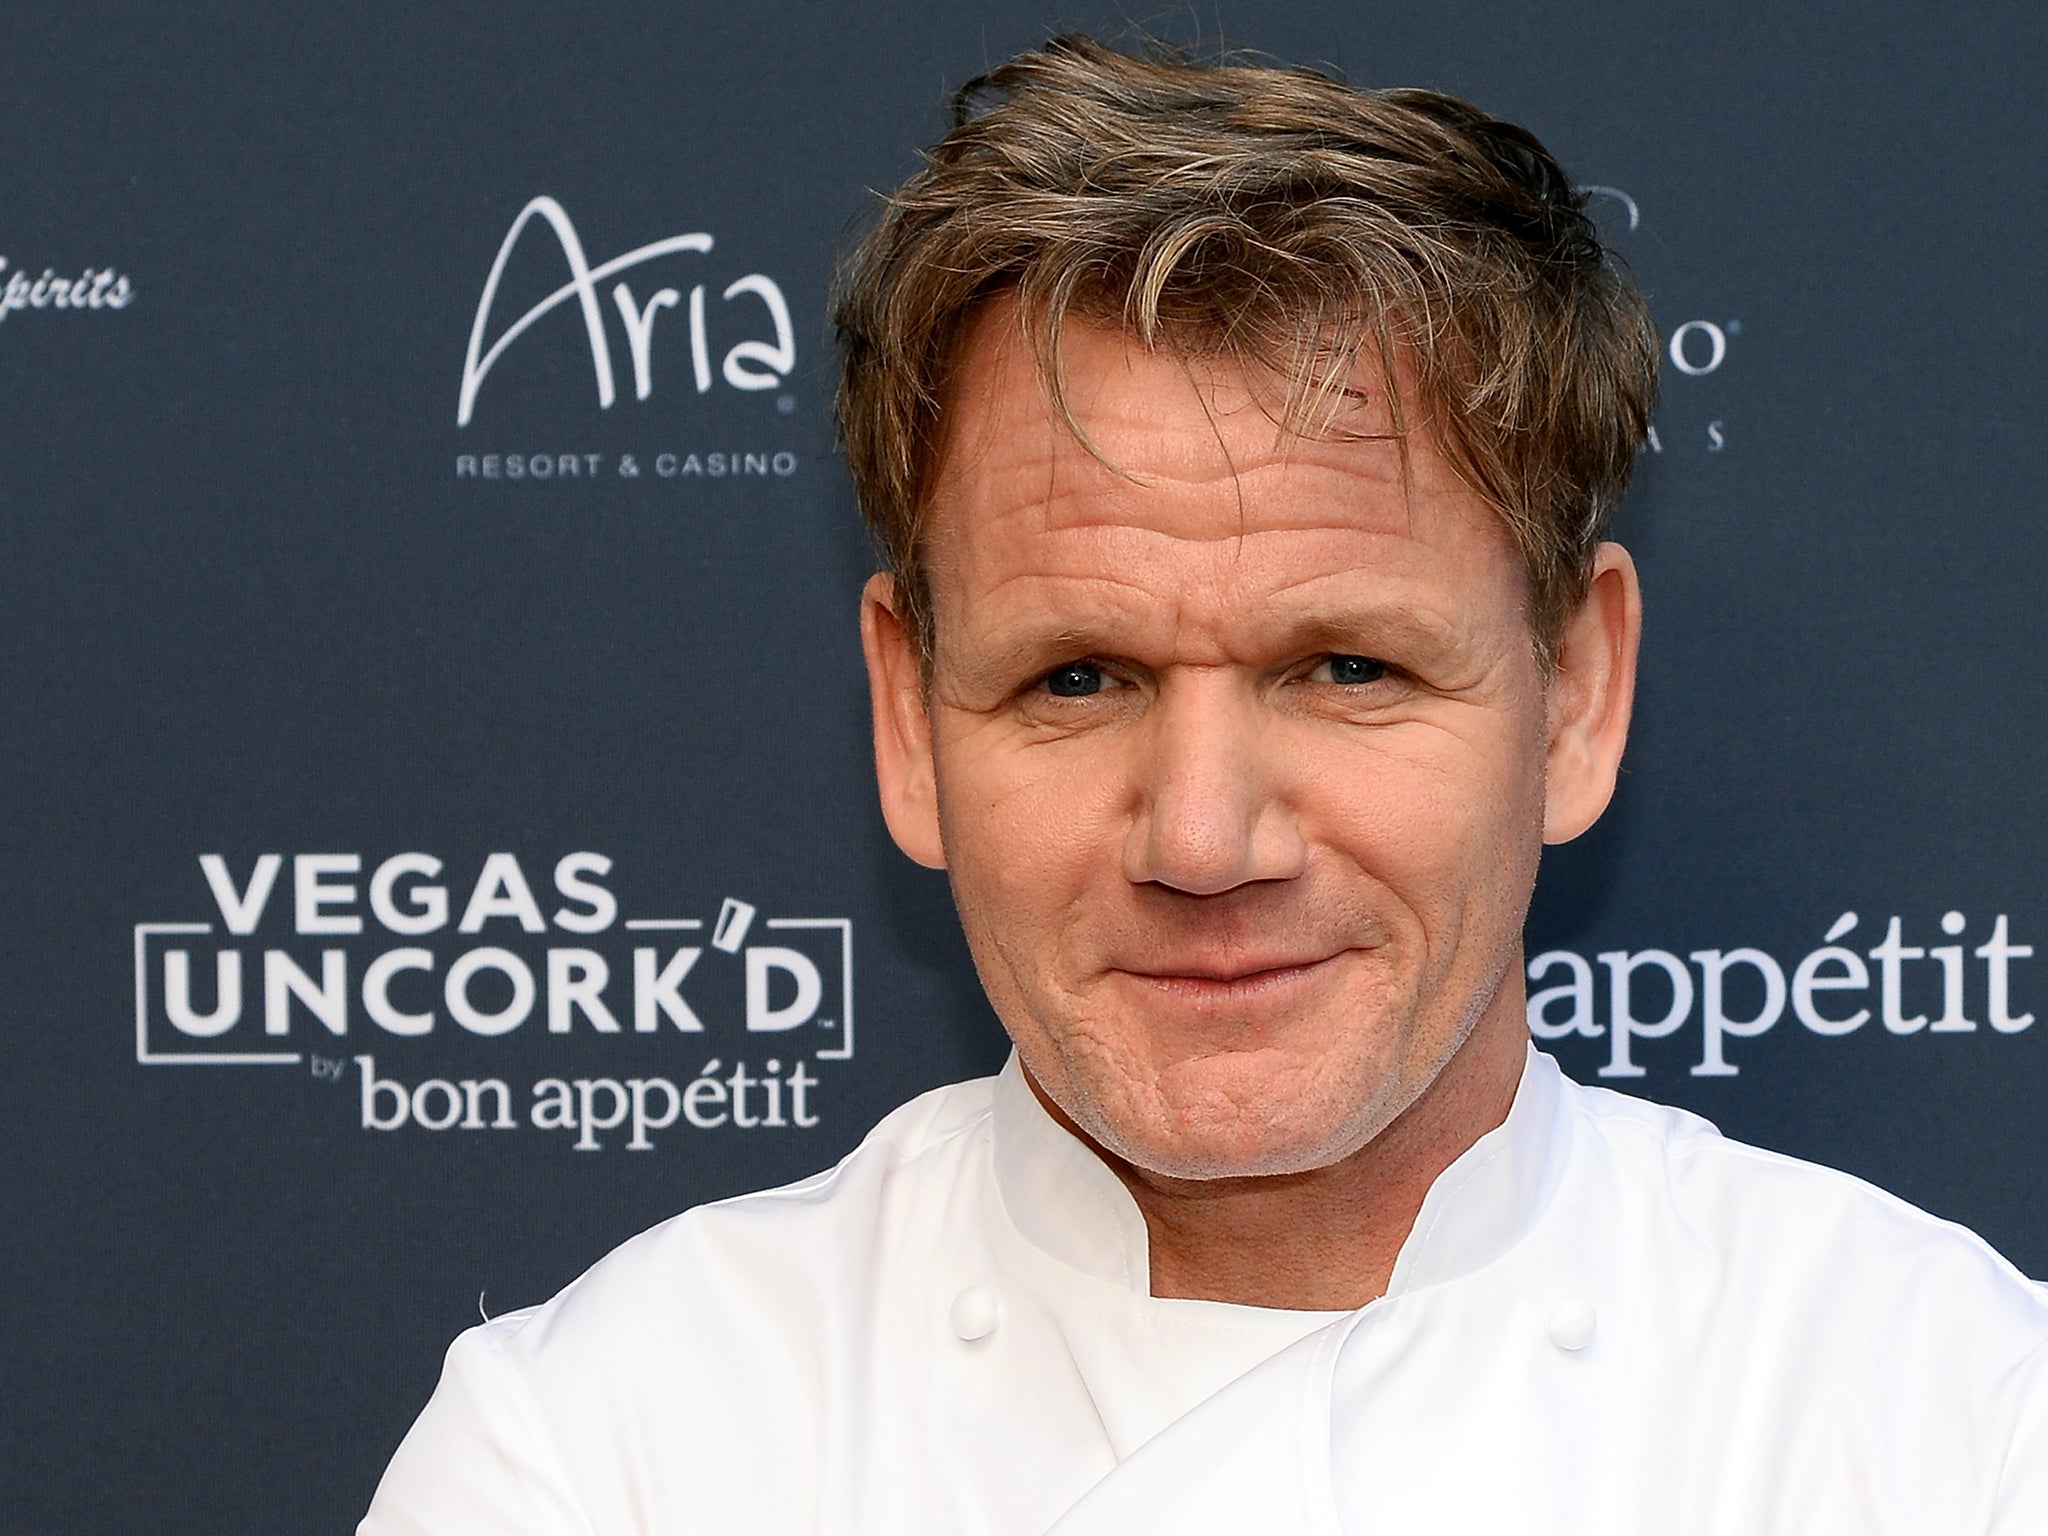 Television personality and chef Gordon Ramsay.